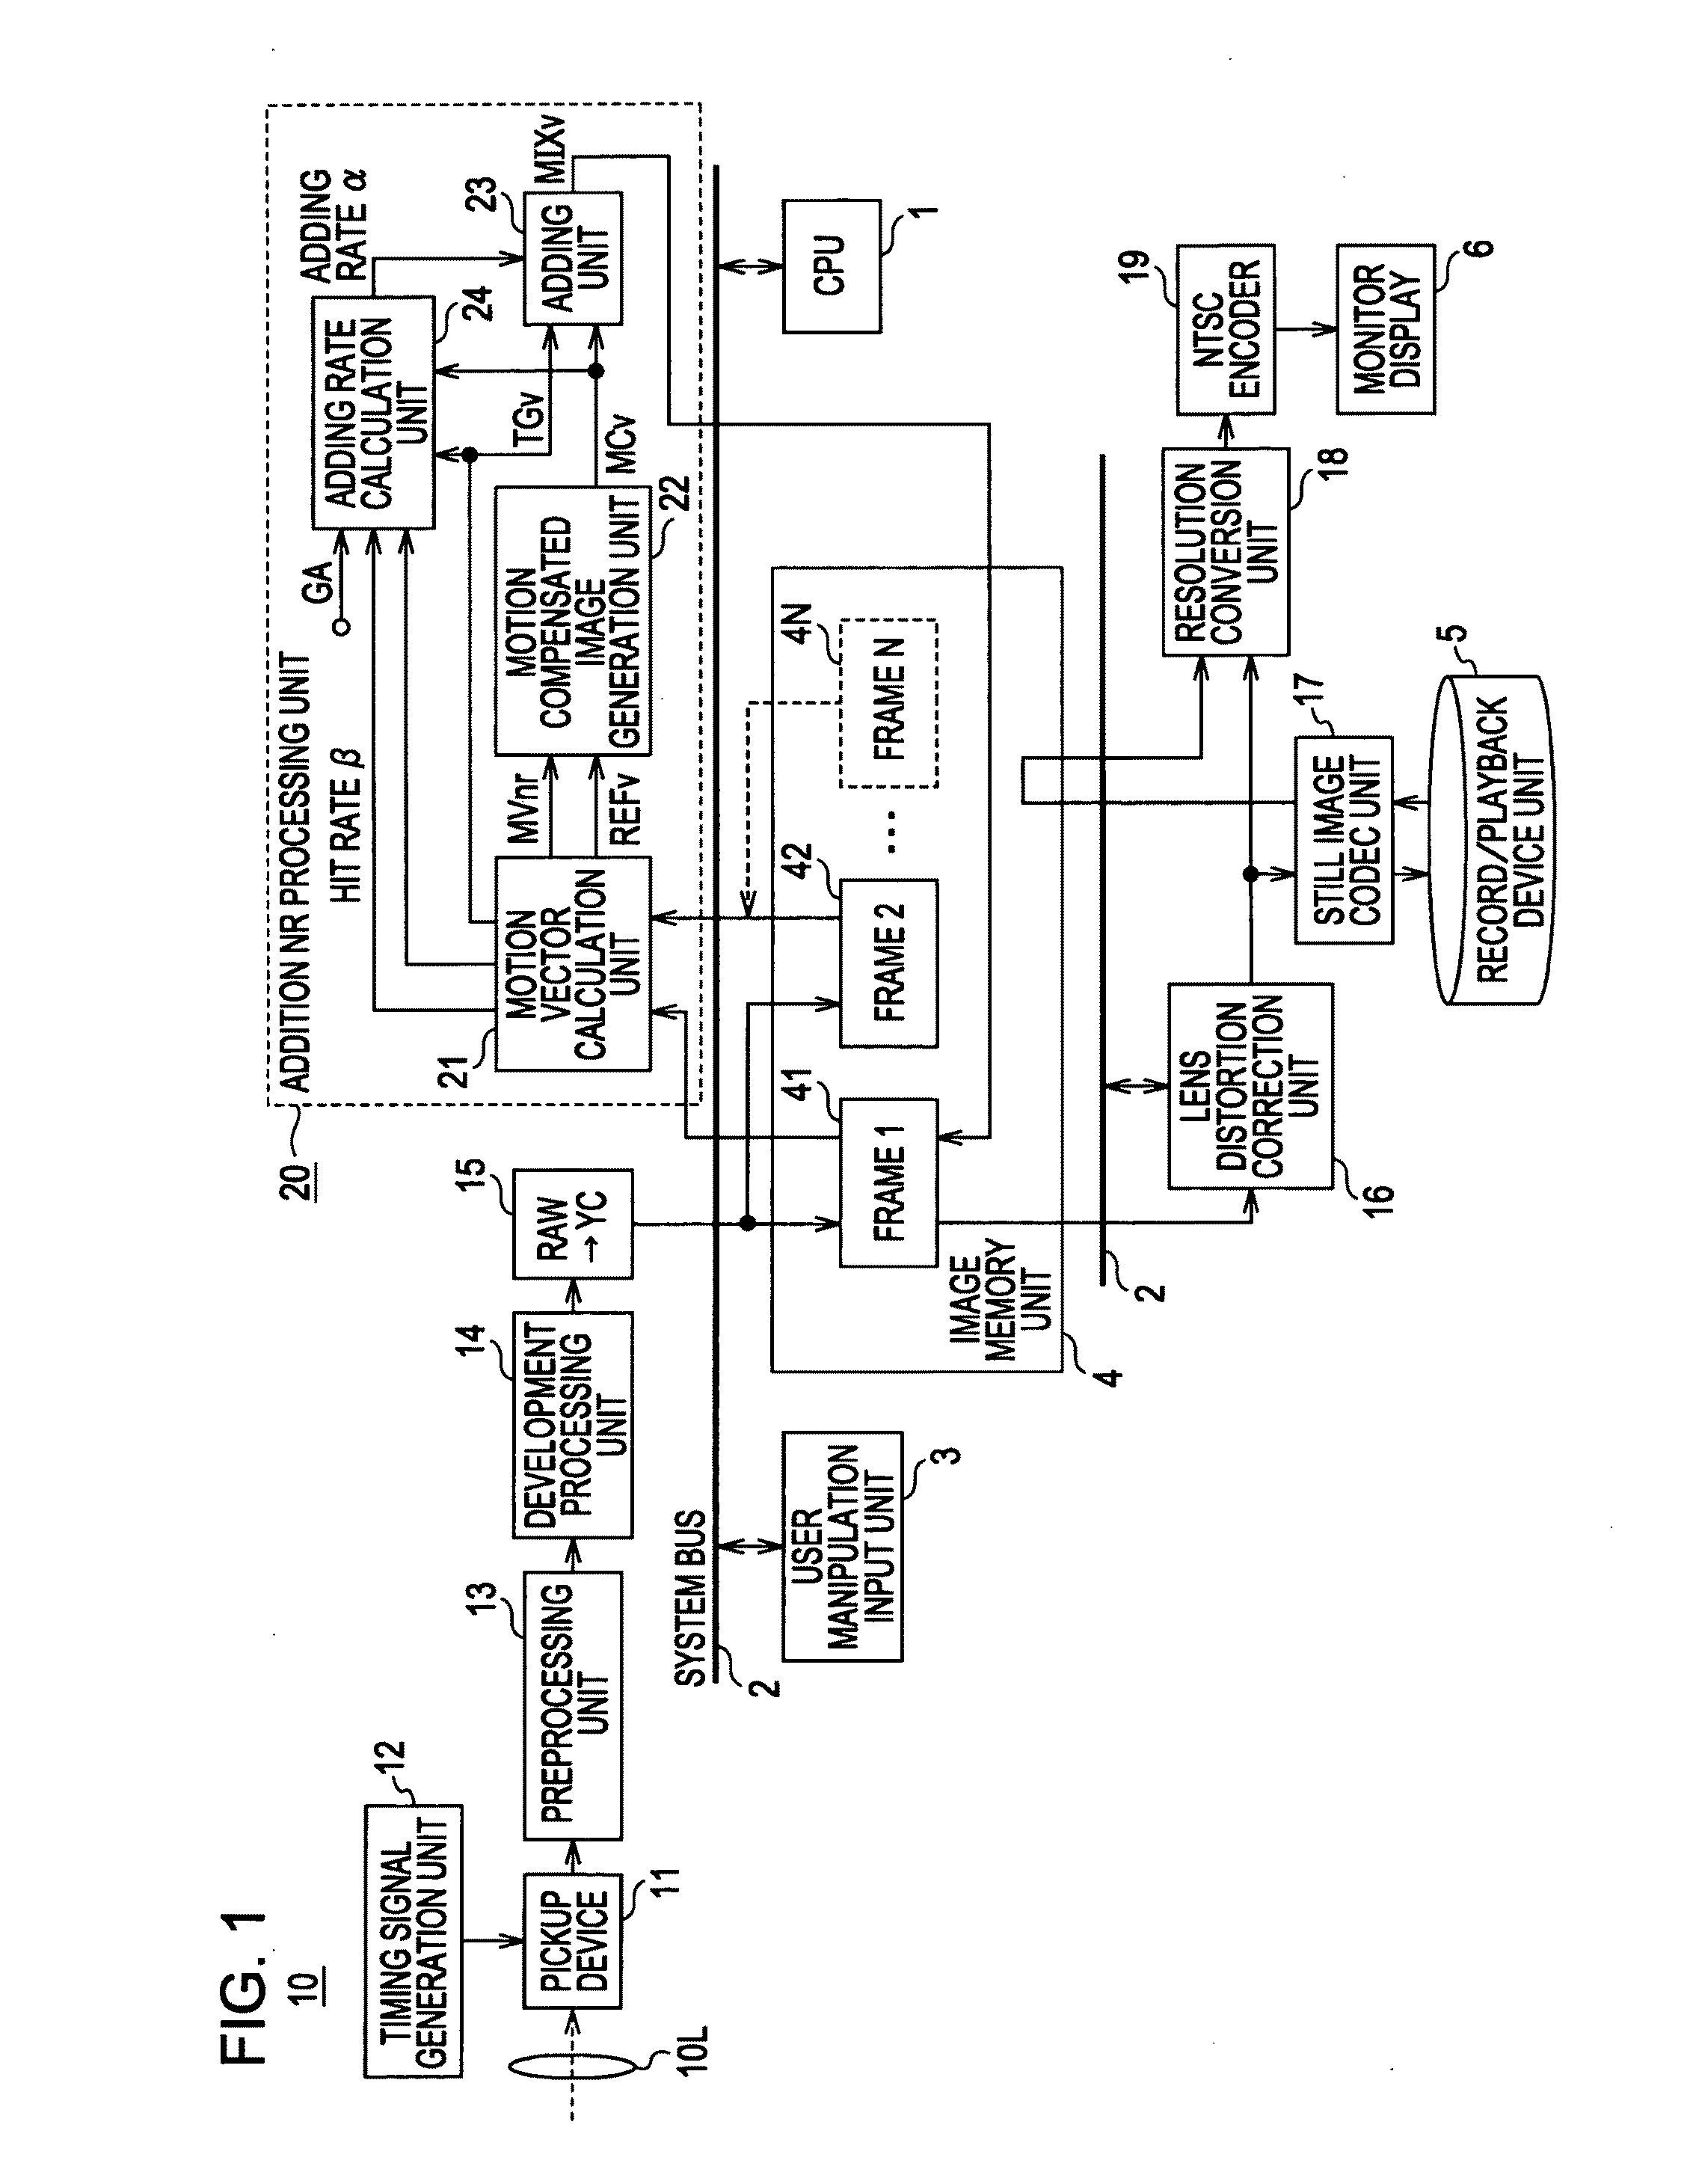 Image processing device, image processing method, and capturing device